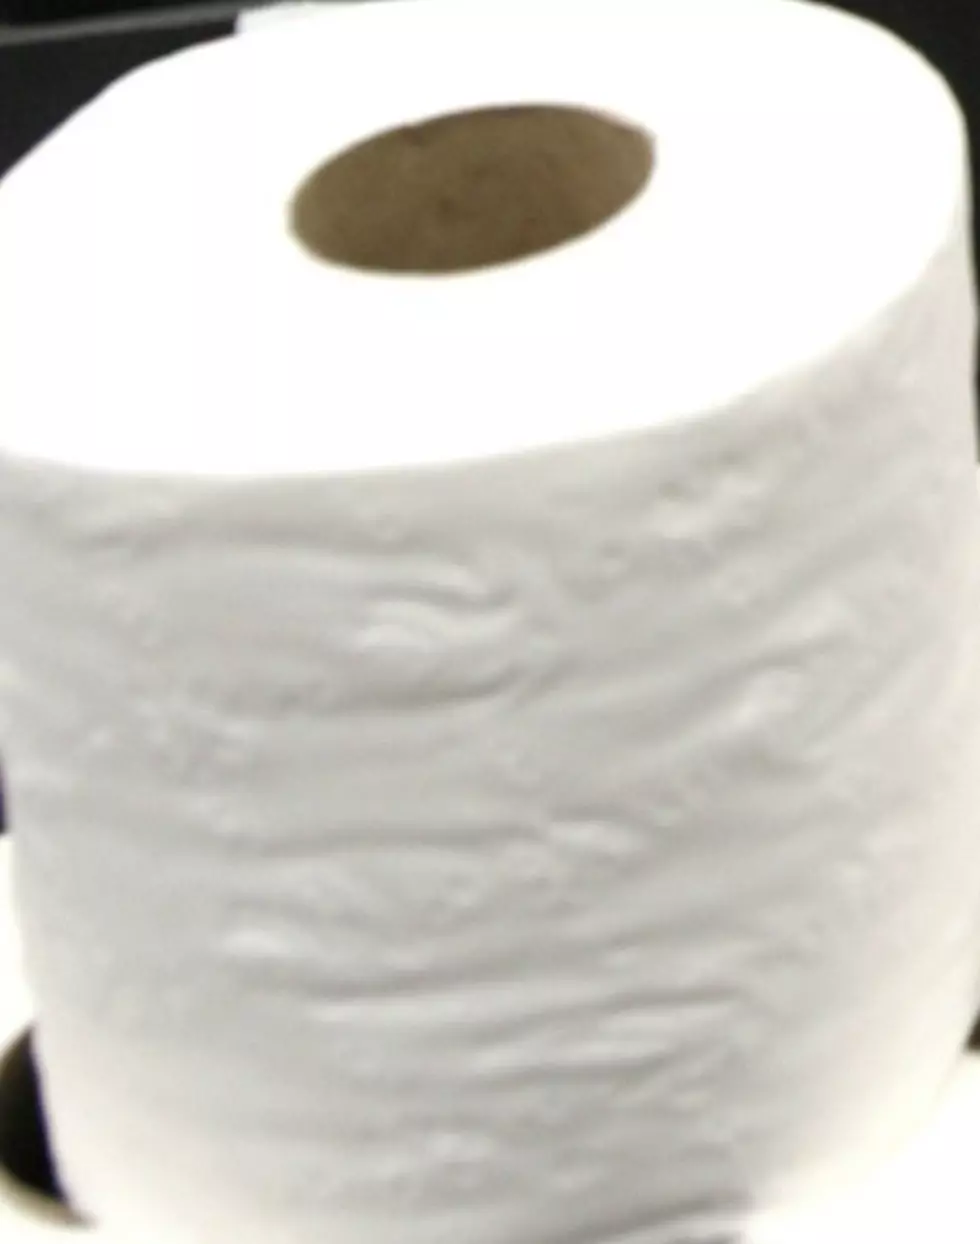 You Won’t Believe How Much Toilet Paper One Couple Bought